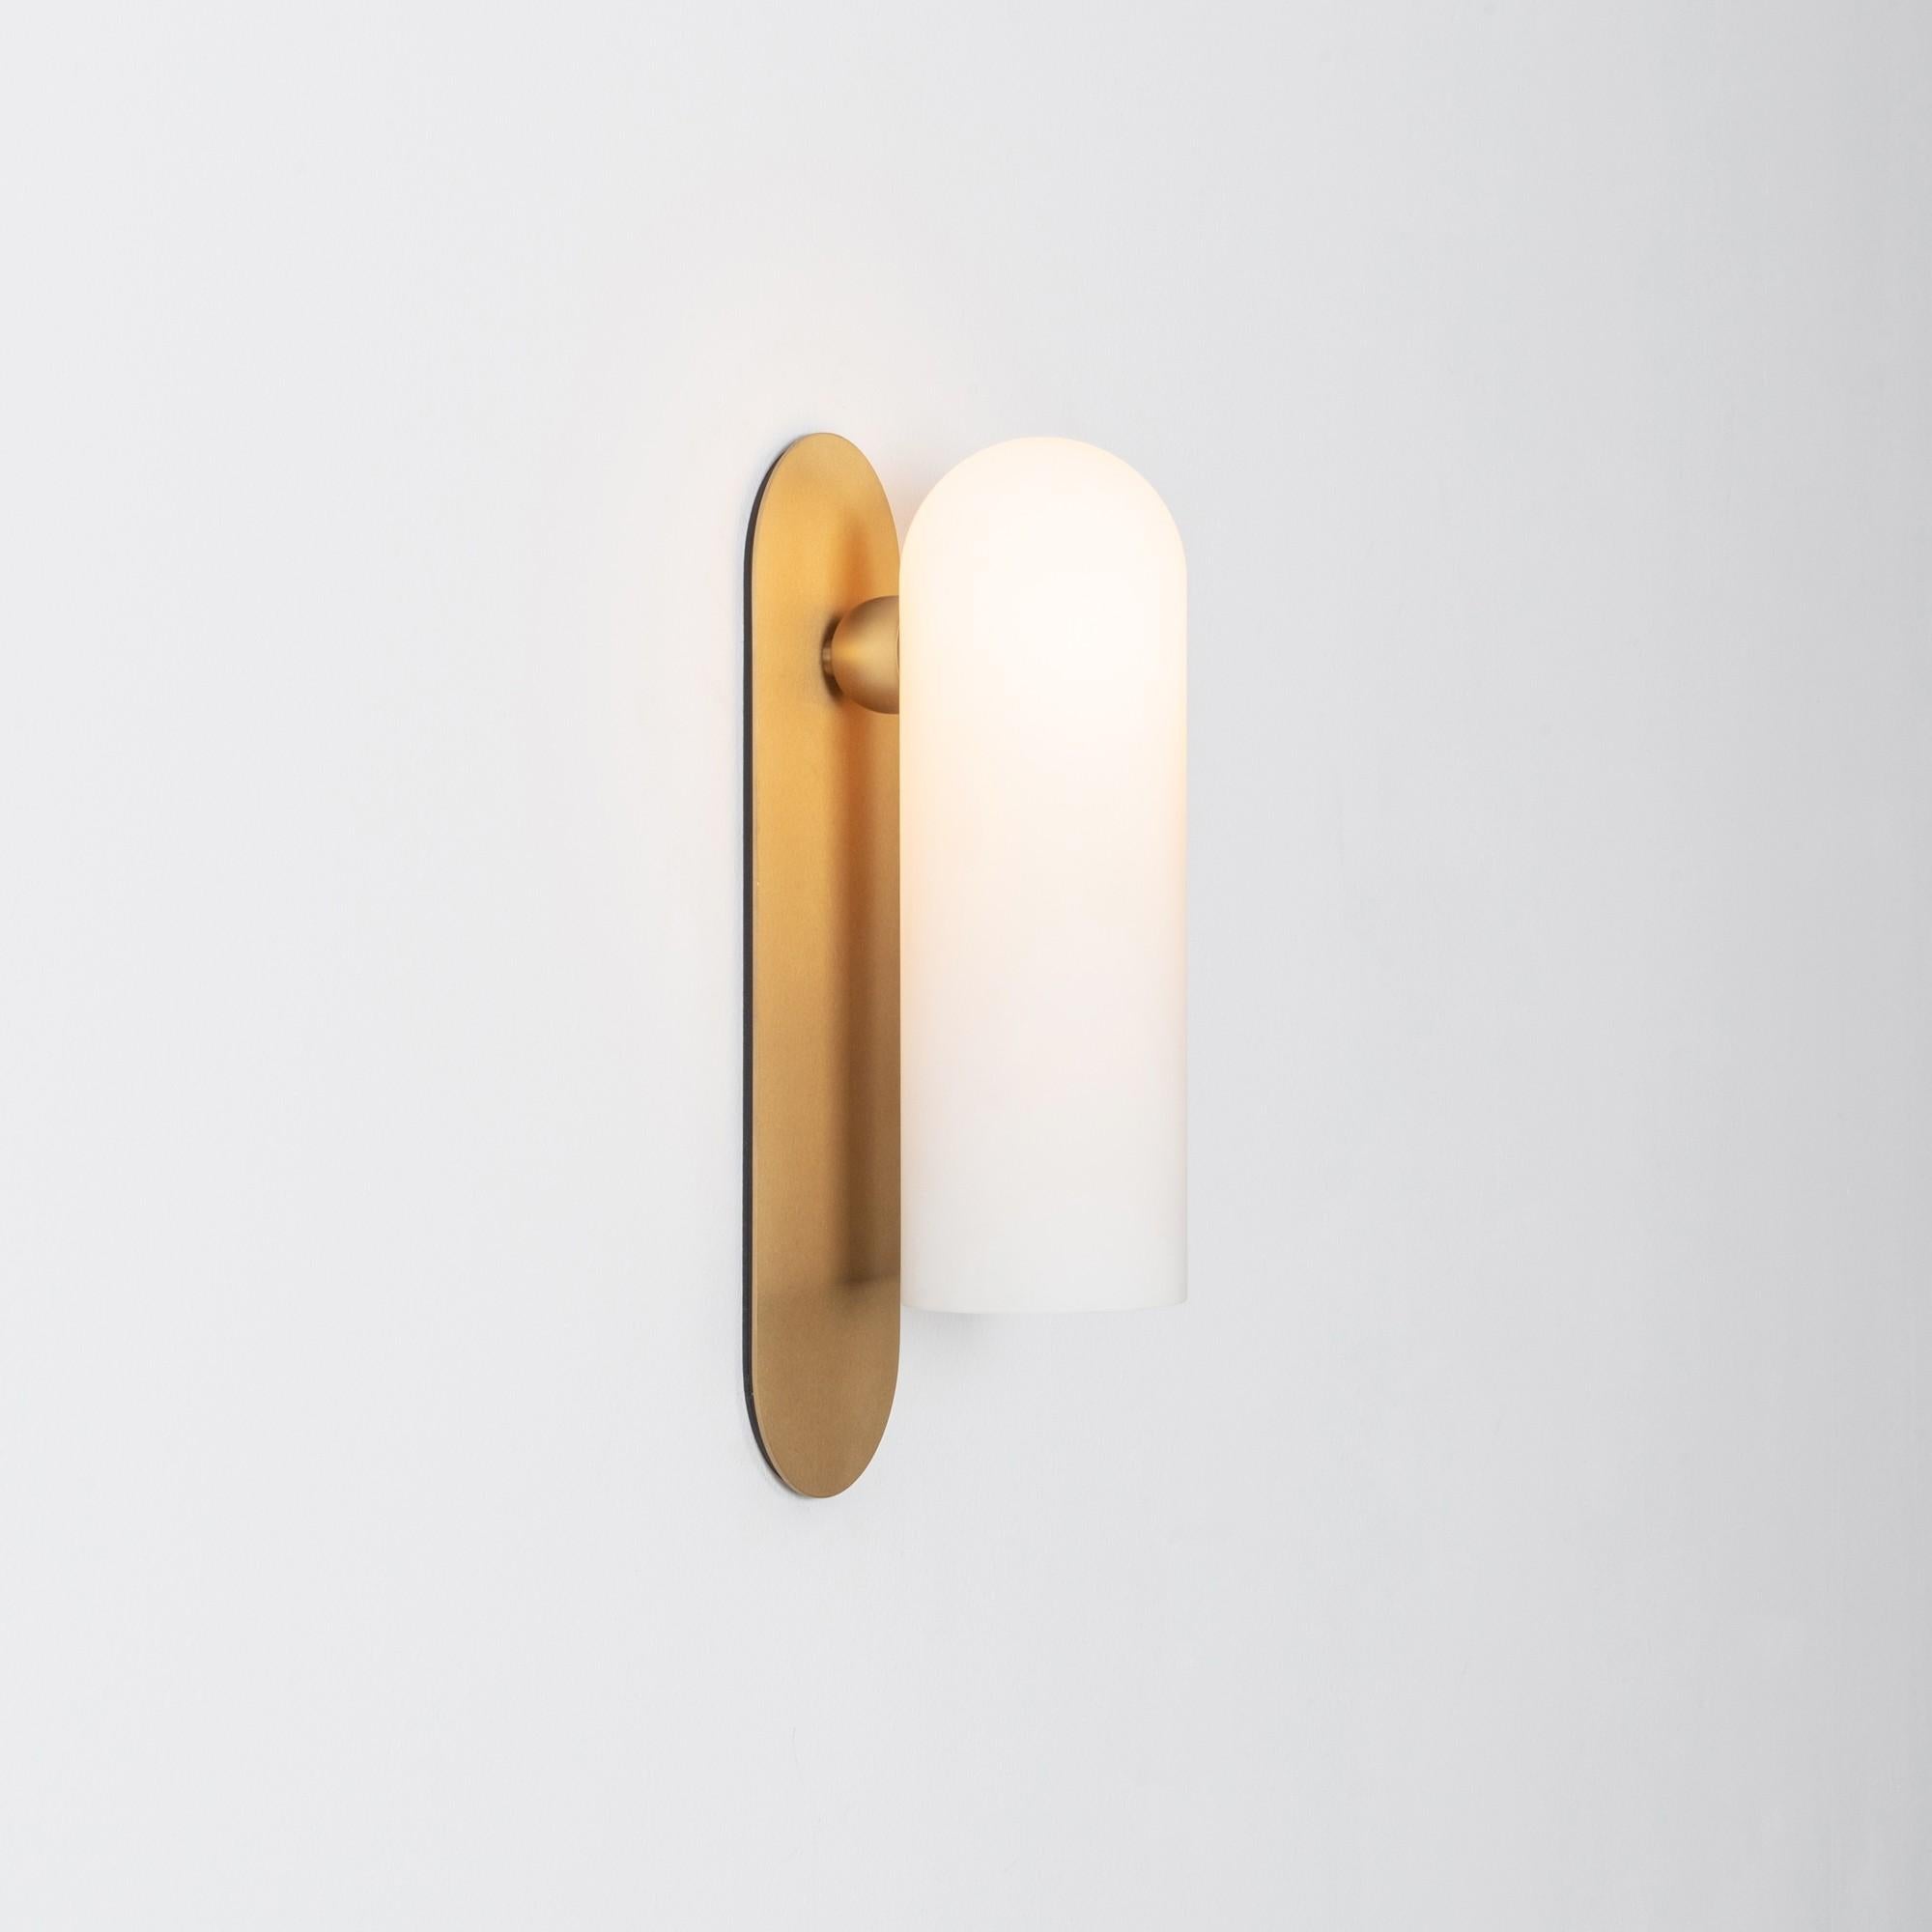 Odyssey LG Brass Wall Sconce by Schwung
Dimensions: W 10.5 x D 14 x H 38 cm
Materials: Brass, frosted glass

Finishes available: Black gunmetal, polished nickel, brass

Schwung is a German word, and loosely defined, means energy or momentumm